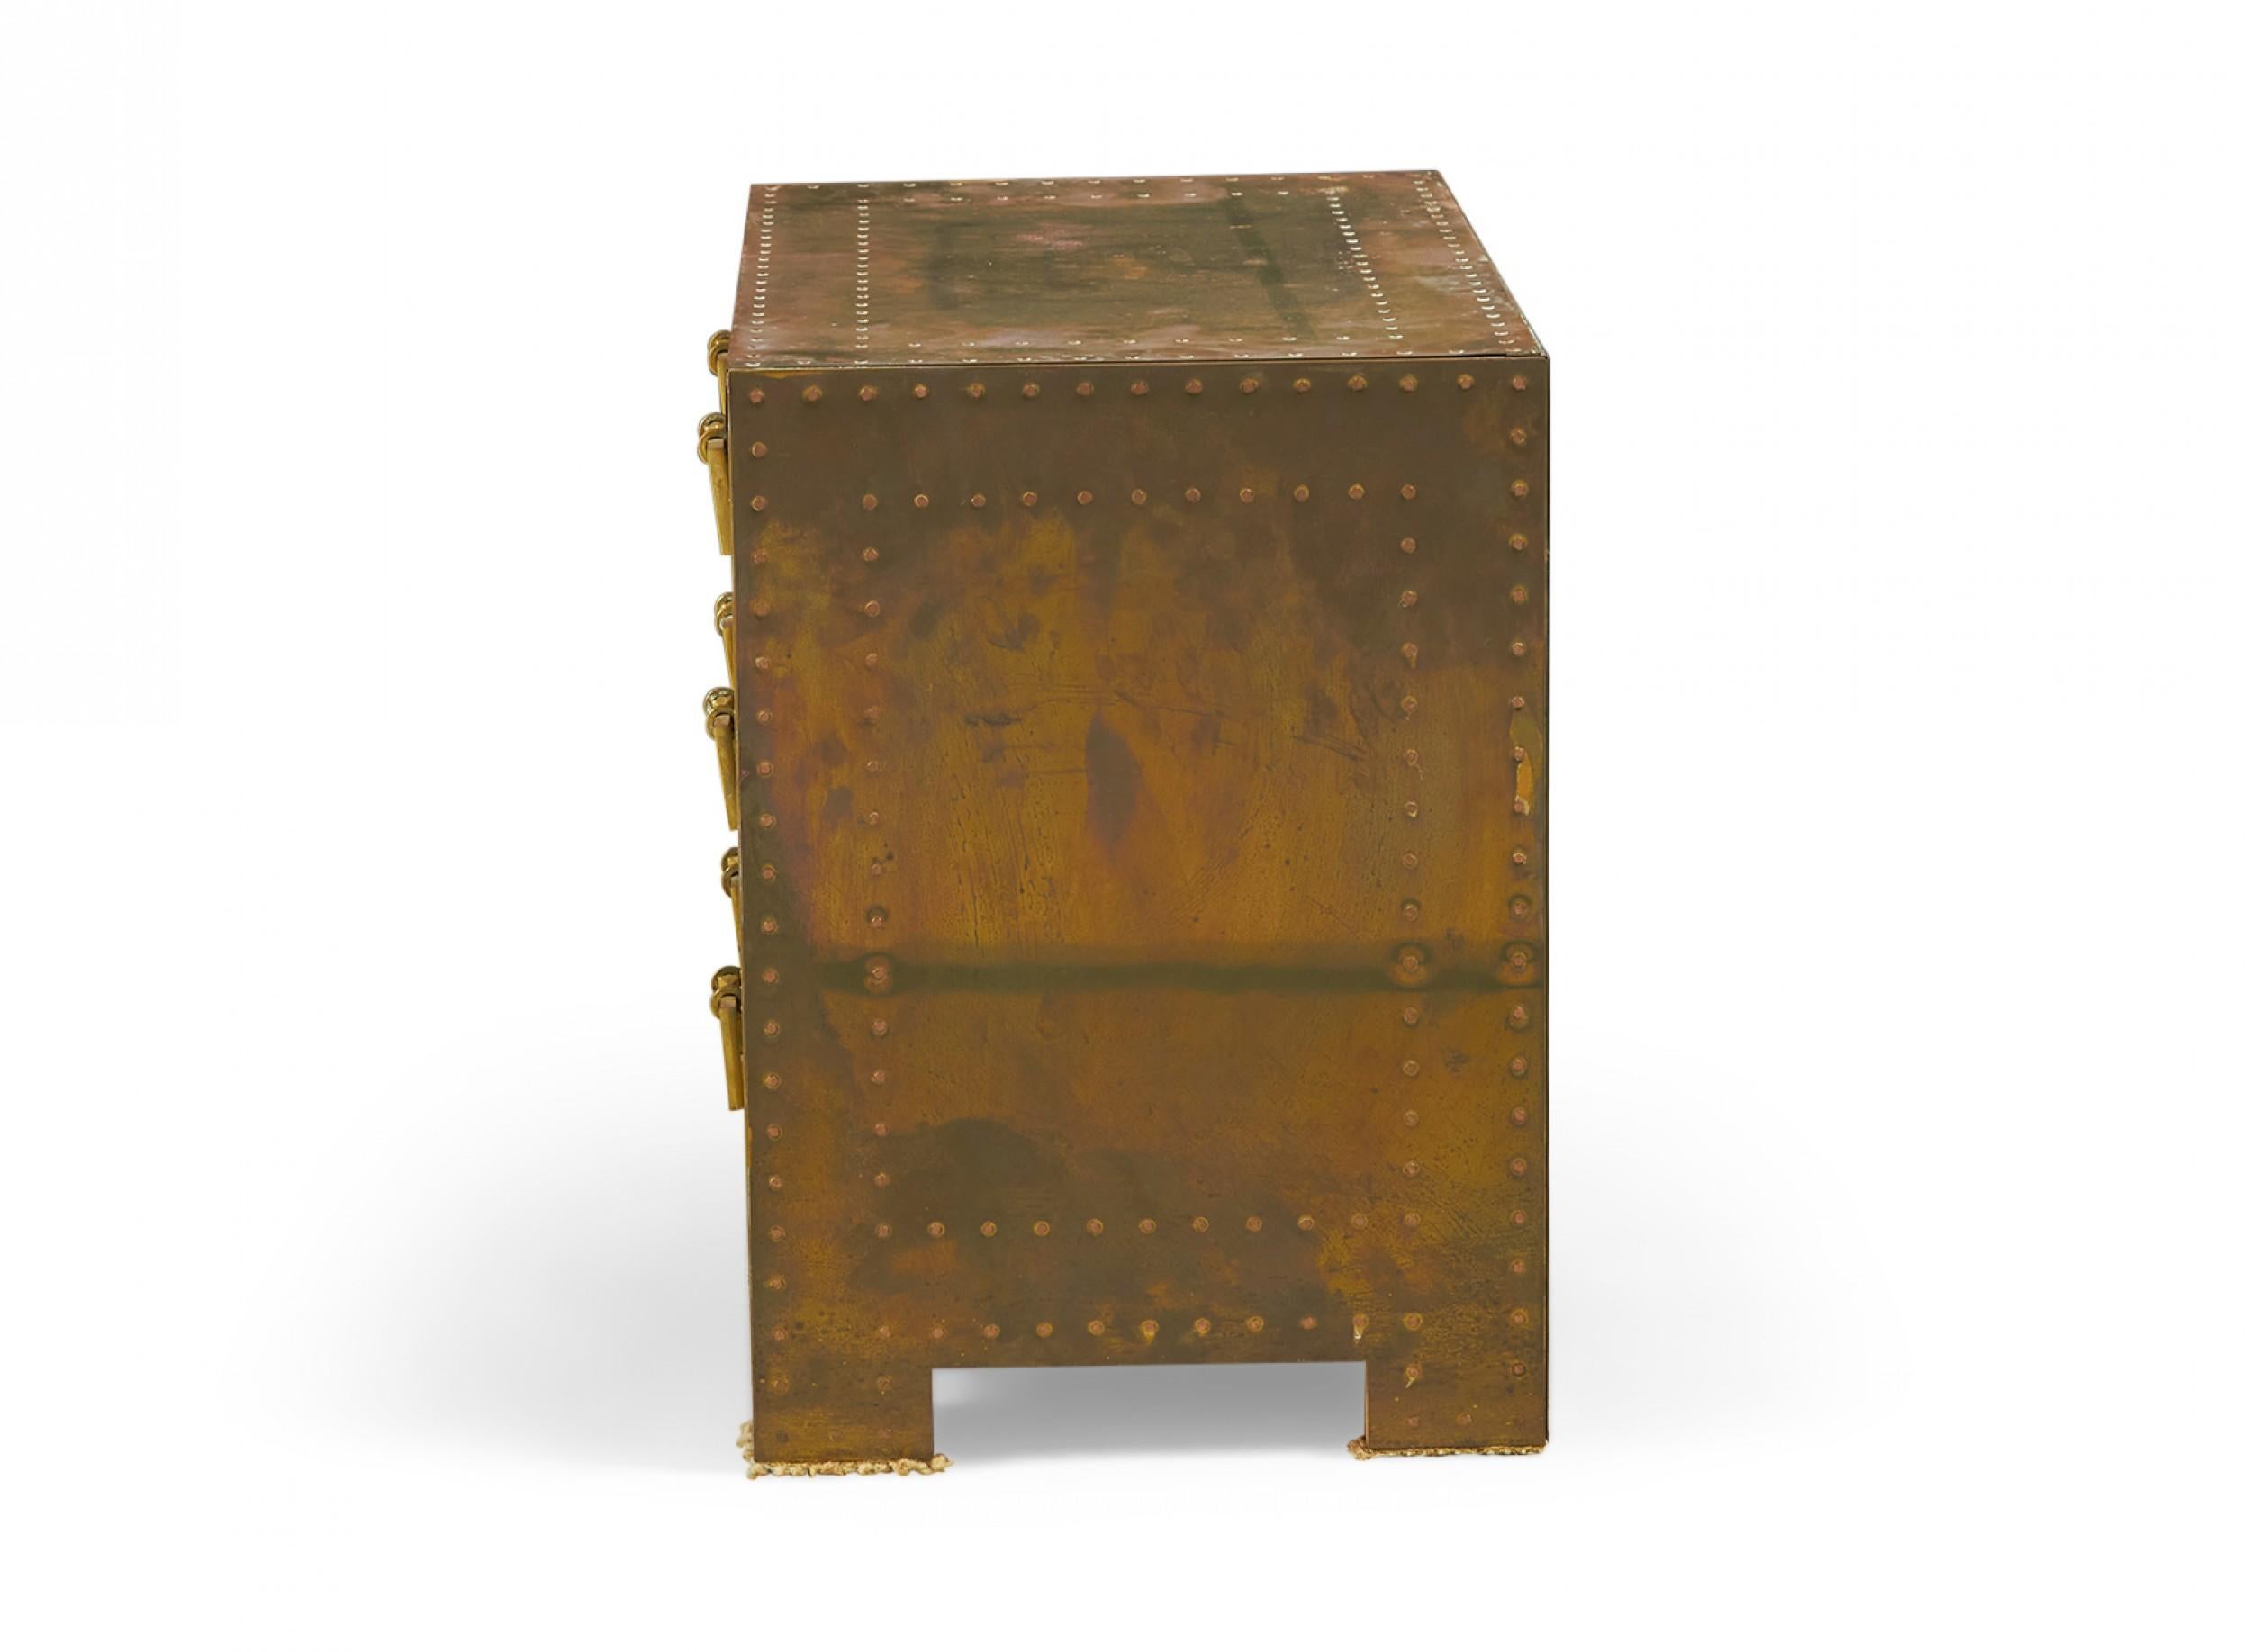 Hollywood Regency Sarreid, Ltd. Spanish High Style Brass Clad Strongbox Commode / Bedside Table For Sale